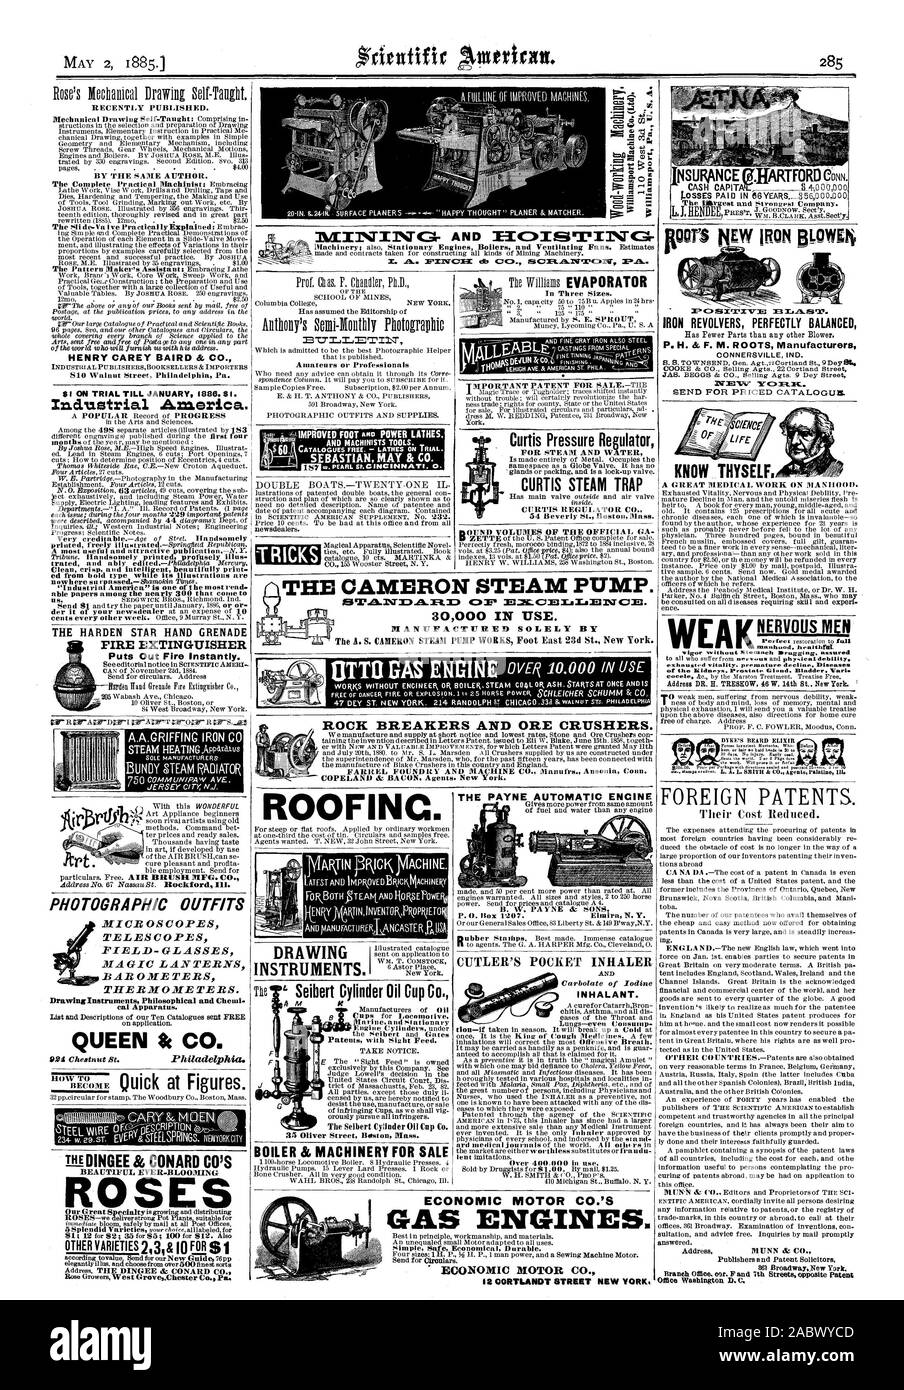 Amateurs or Professionals SEBASTIAN MAY & CO. TRICKS ROOFING. In Three Sizes. York. P. O. Box 1207. Elmira N.Y. CUTLER'S POCKET INHALER INHALANT. IRON REVOLVERS PERFECTLY BALANCED P. H. & F. M. ROOTS Manufacturers CONNERSVILLE (ND. NERVOUS MEN manhood. healthful. nd. Bladde. ori Their Cost Reduced. HENRY CAREY BAIRD & CO. 810 Walnut Street Philadelphia Pa. Clean crisp and intelligent beautifully print 'Industrial America' is one of he most read. THE HARDEN STAR HAND GRENADE FIRE EXTINGUISHER Puts Out Fire Instantly. PHOTOGRAPHIC OUTFITS MICROSCOPES TELESCOPES FIELD-GLASSES MAGIC LANTERNS Stock Photo